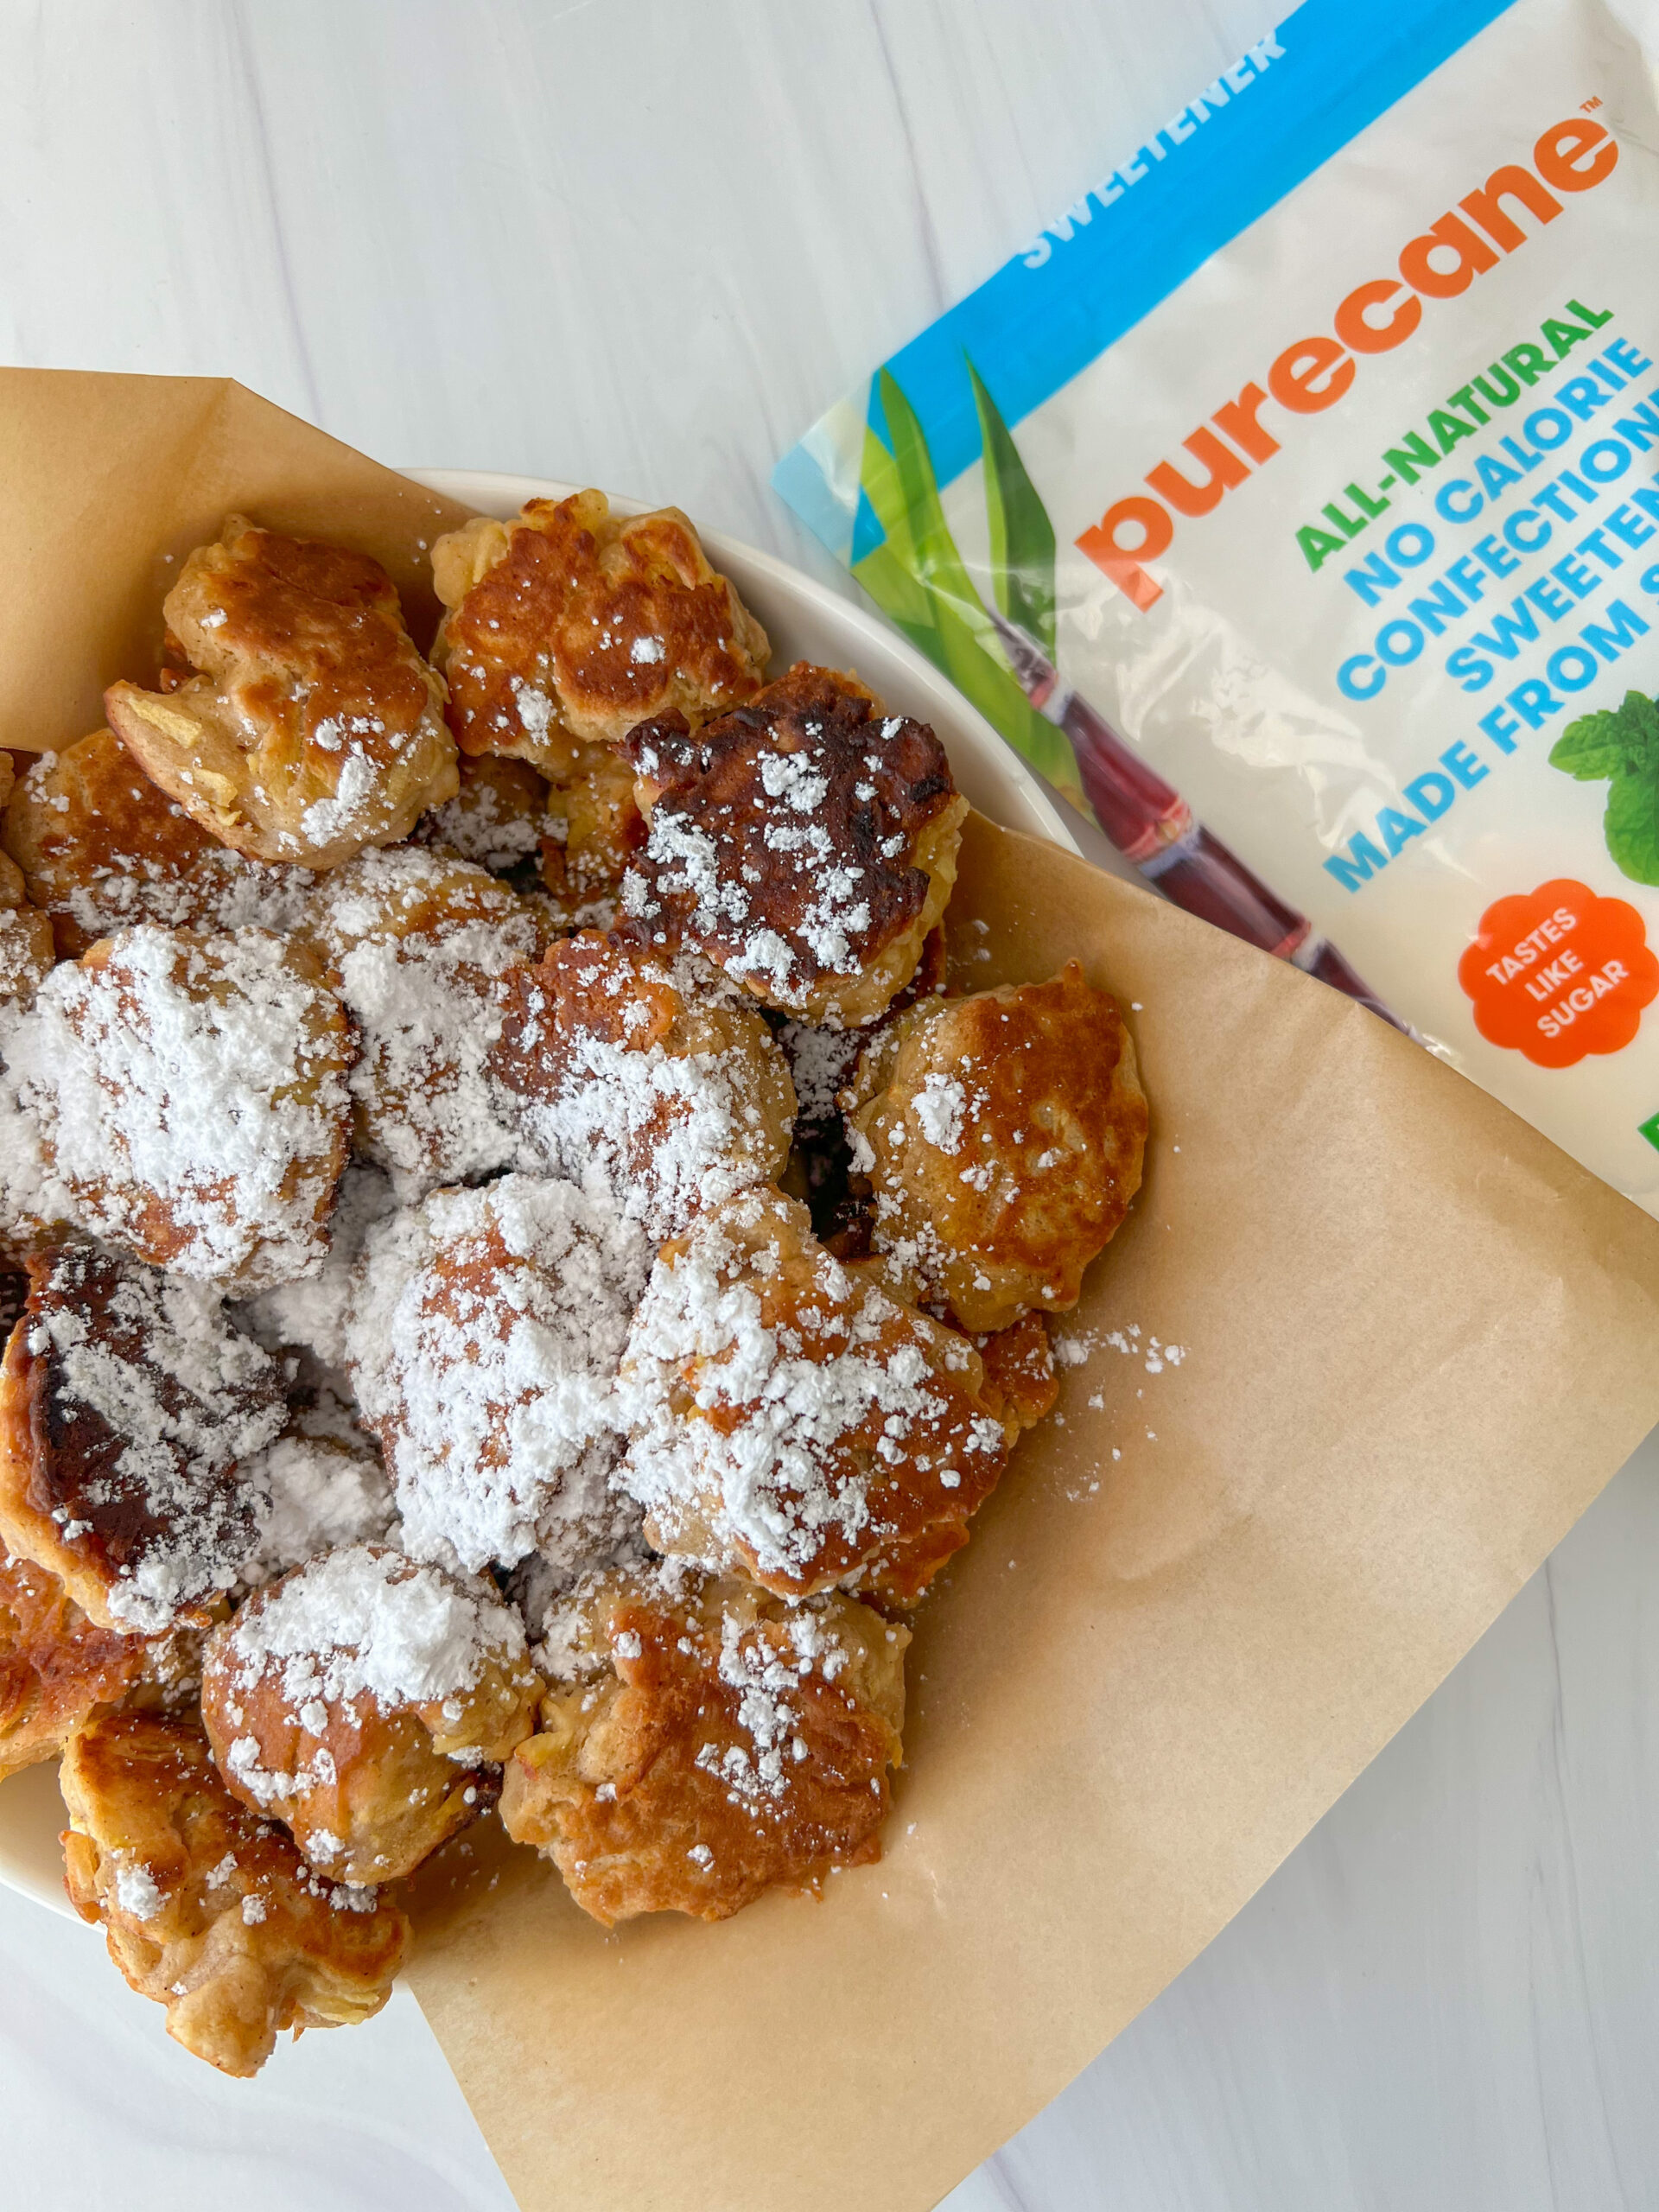 Vegan apple fritters topped with powdered sugar.